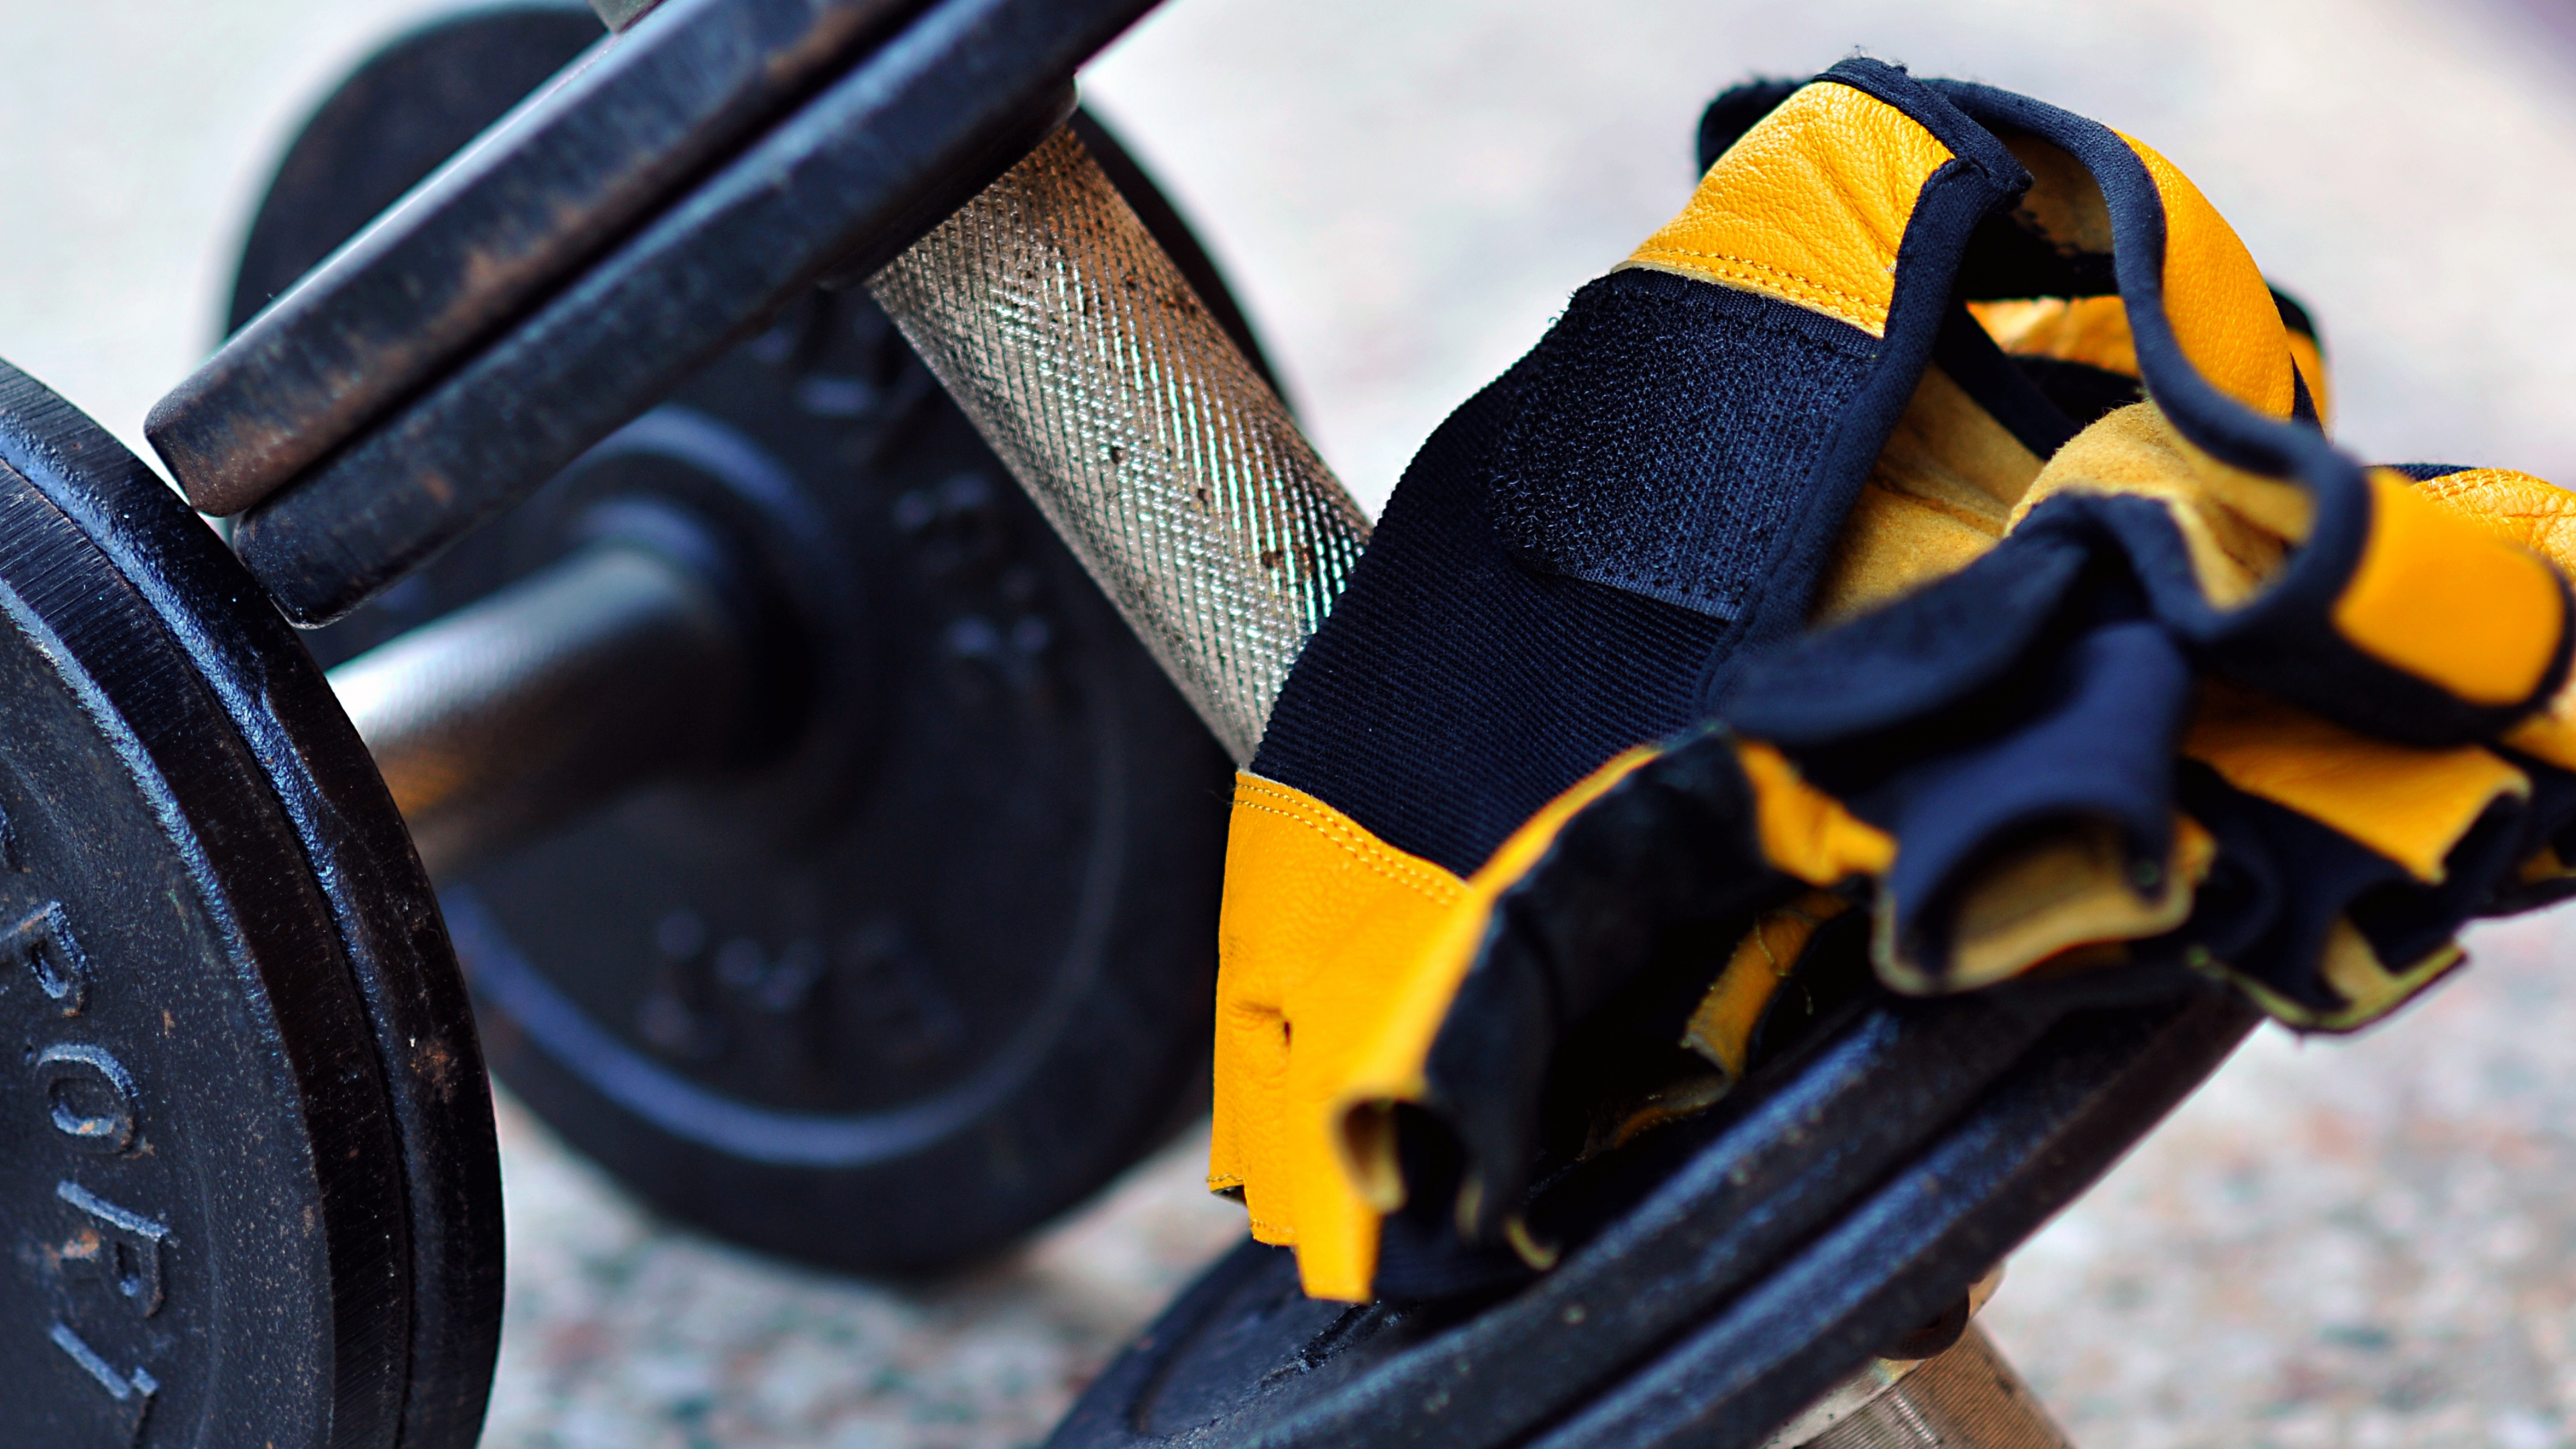 Black and Yellow Dumbbell on Gray Concrete Floor. Wallpaper in 3840x2160 Resolution